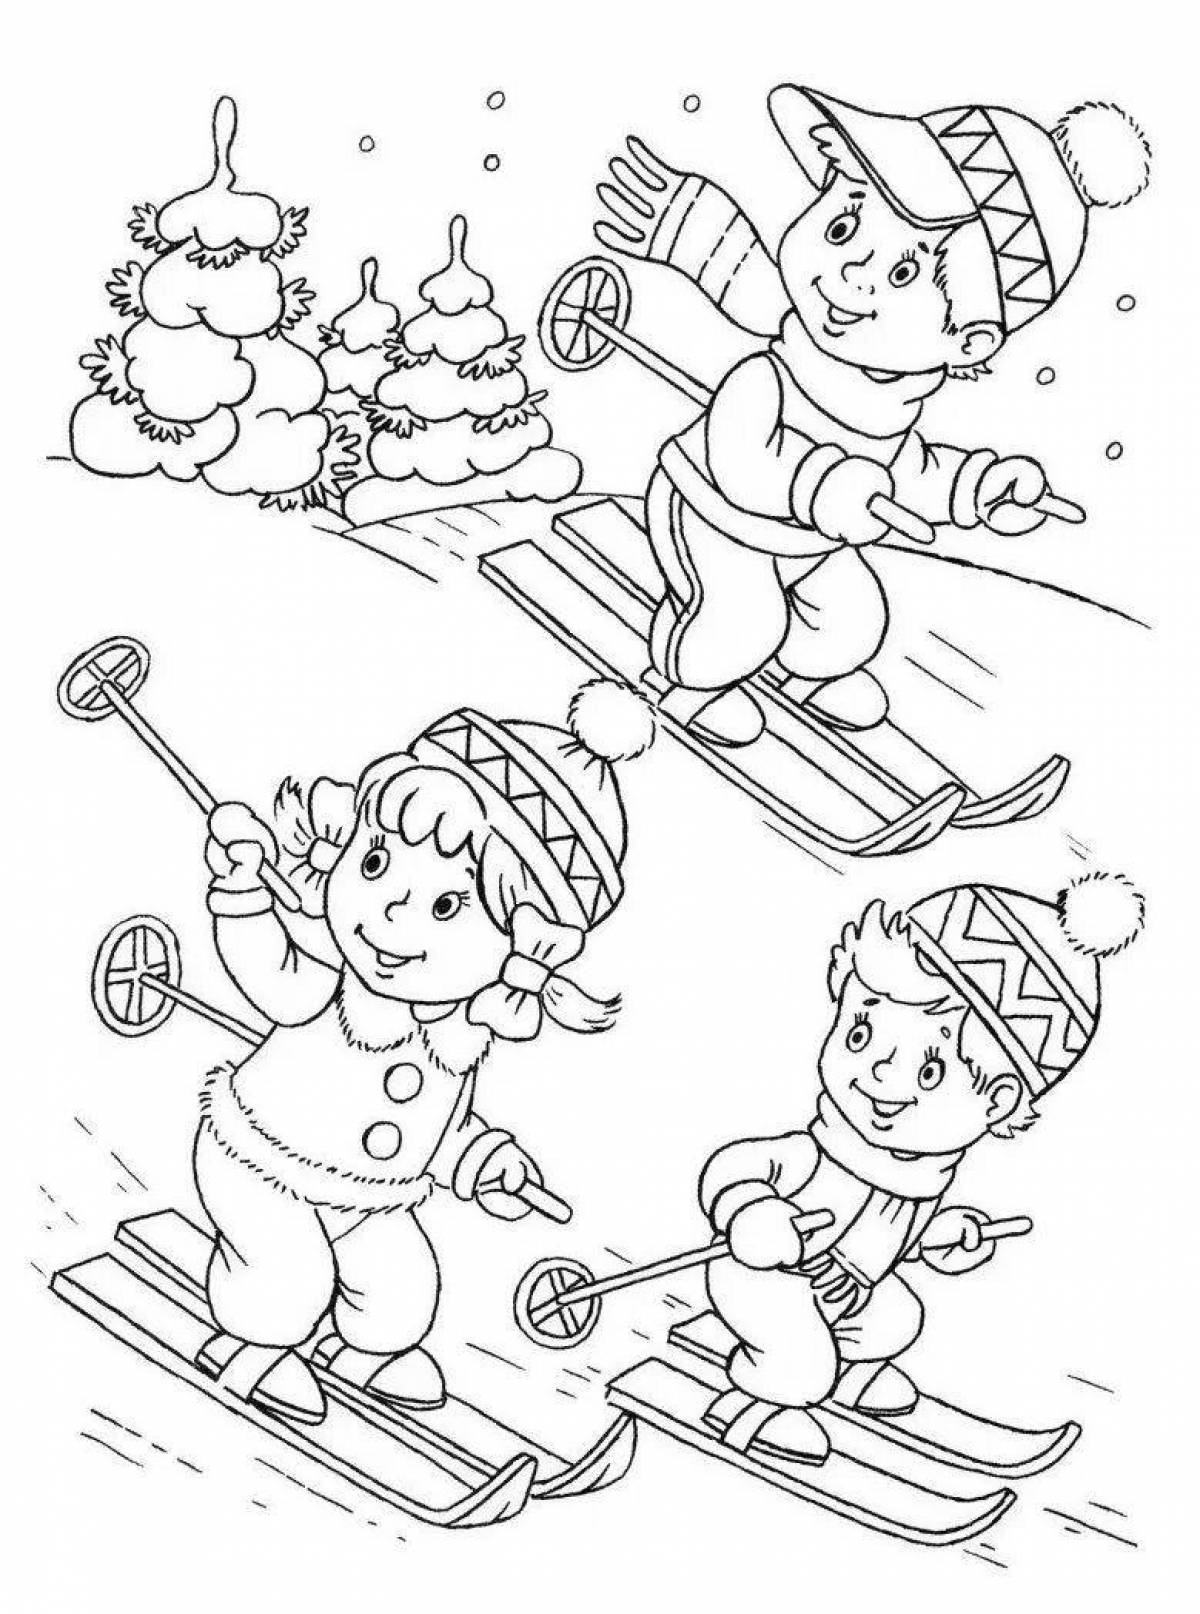 For kids sports in winter #1